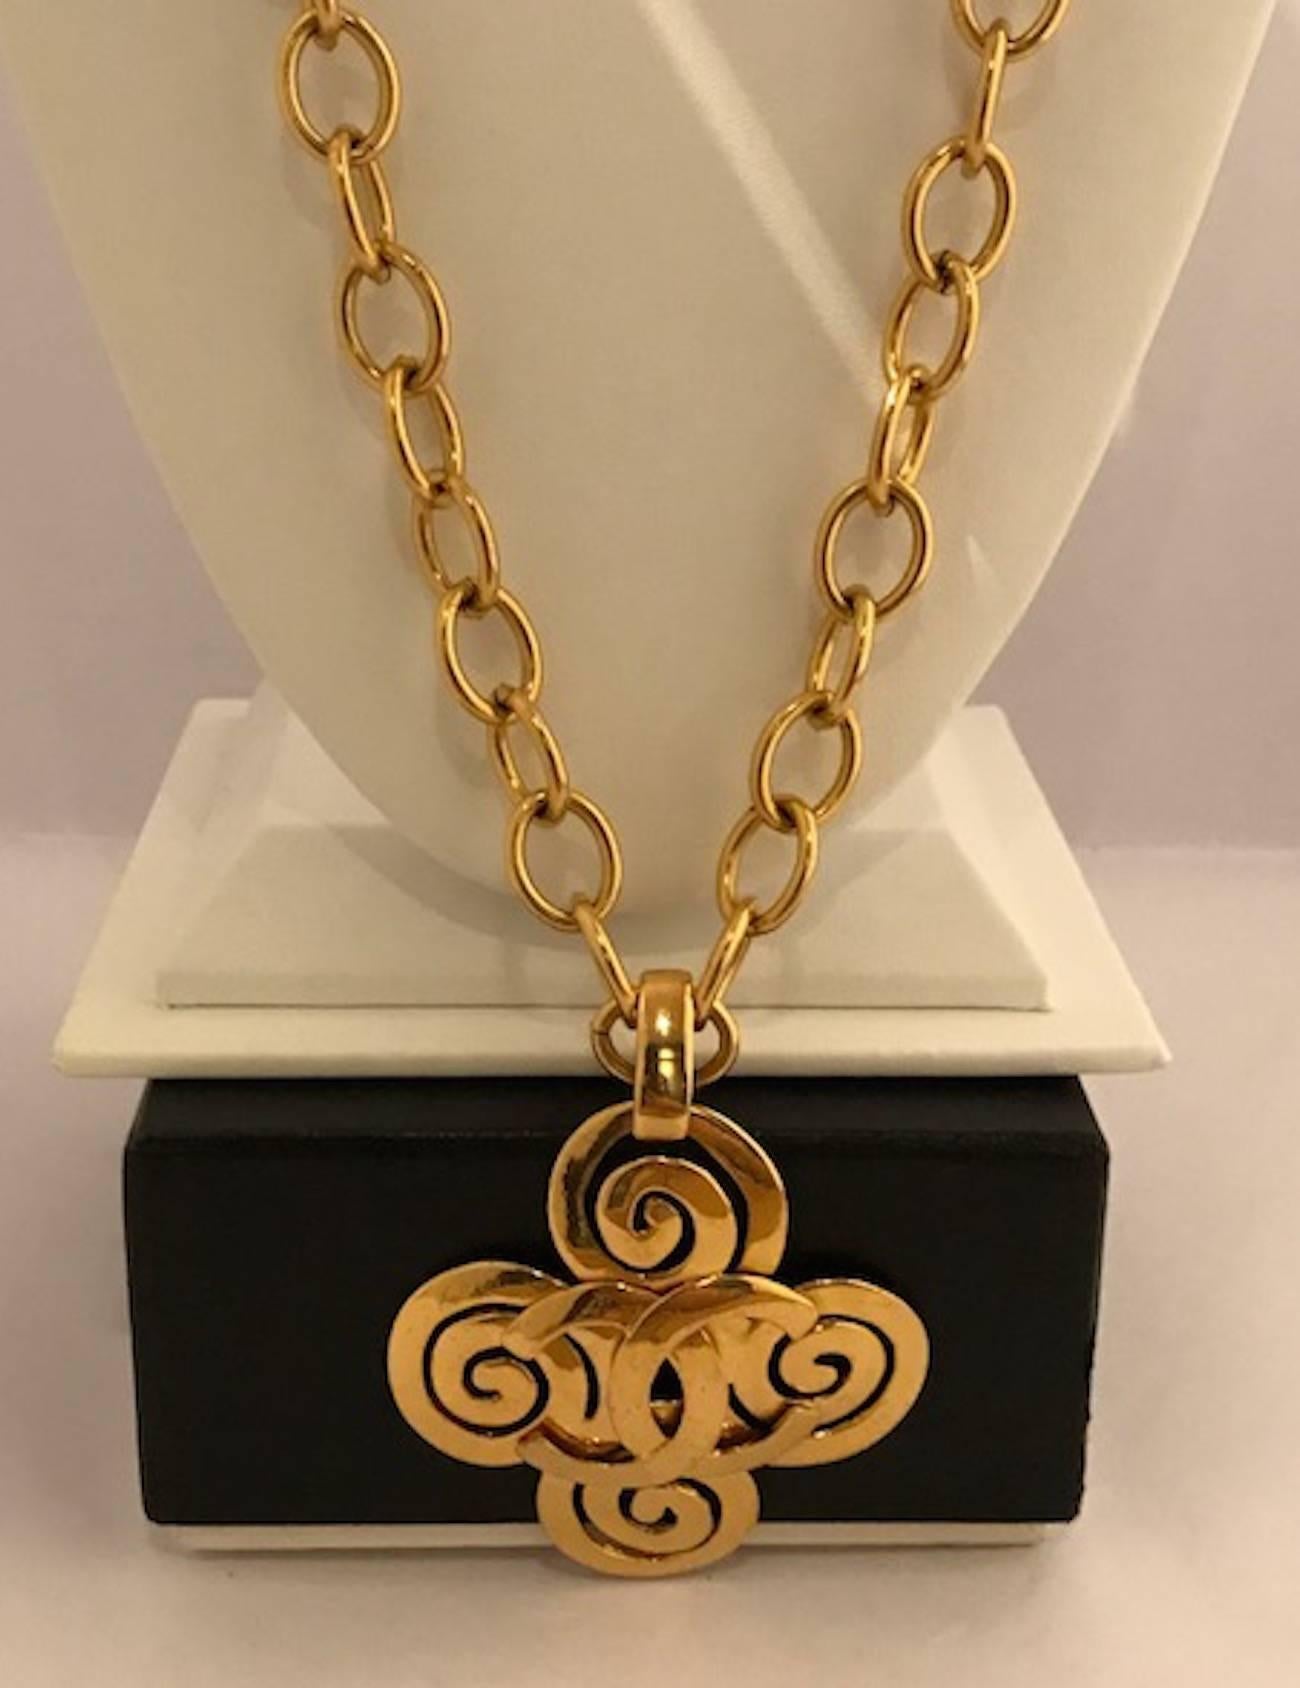 Women's Chanel Large Pendant Necklace Spring 1995 Collection